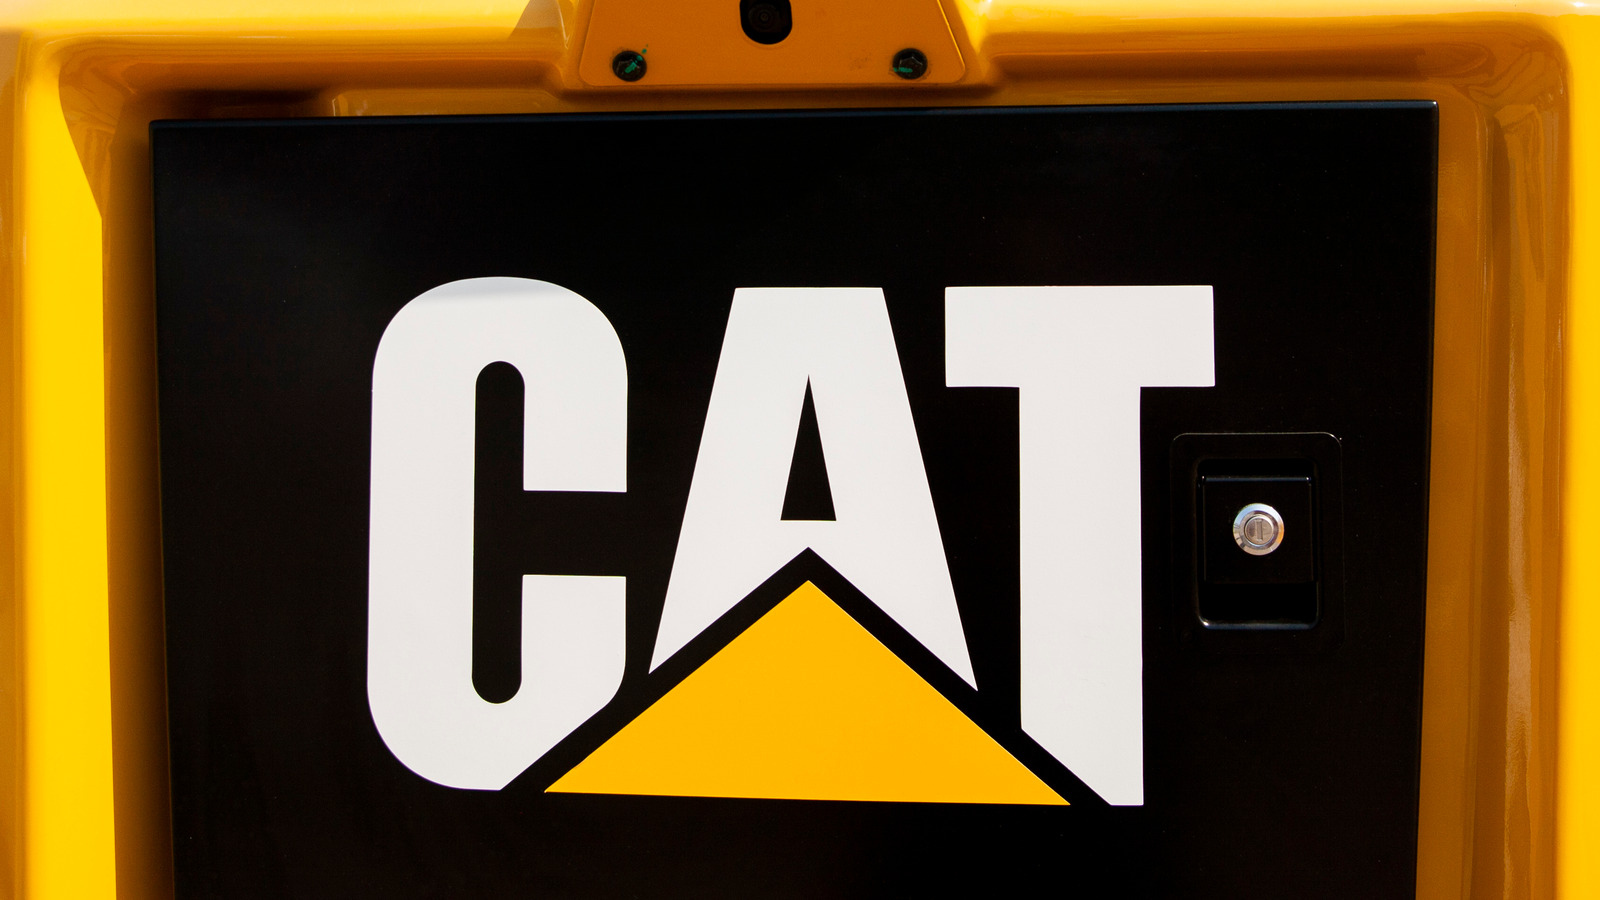 Caterpillar's History With Truck Engines Goes Back Farther Than You May Have Realized